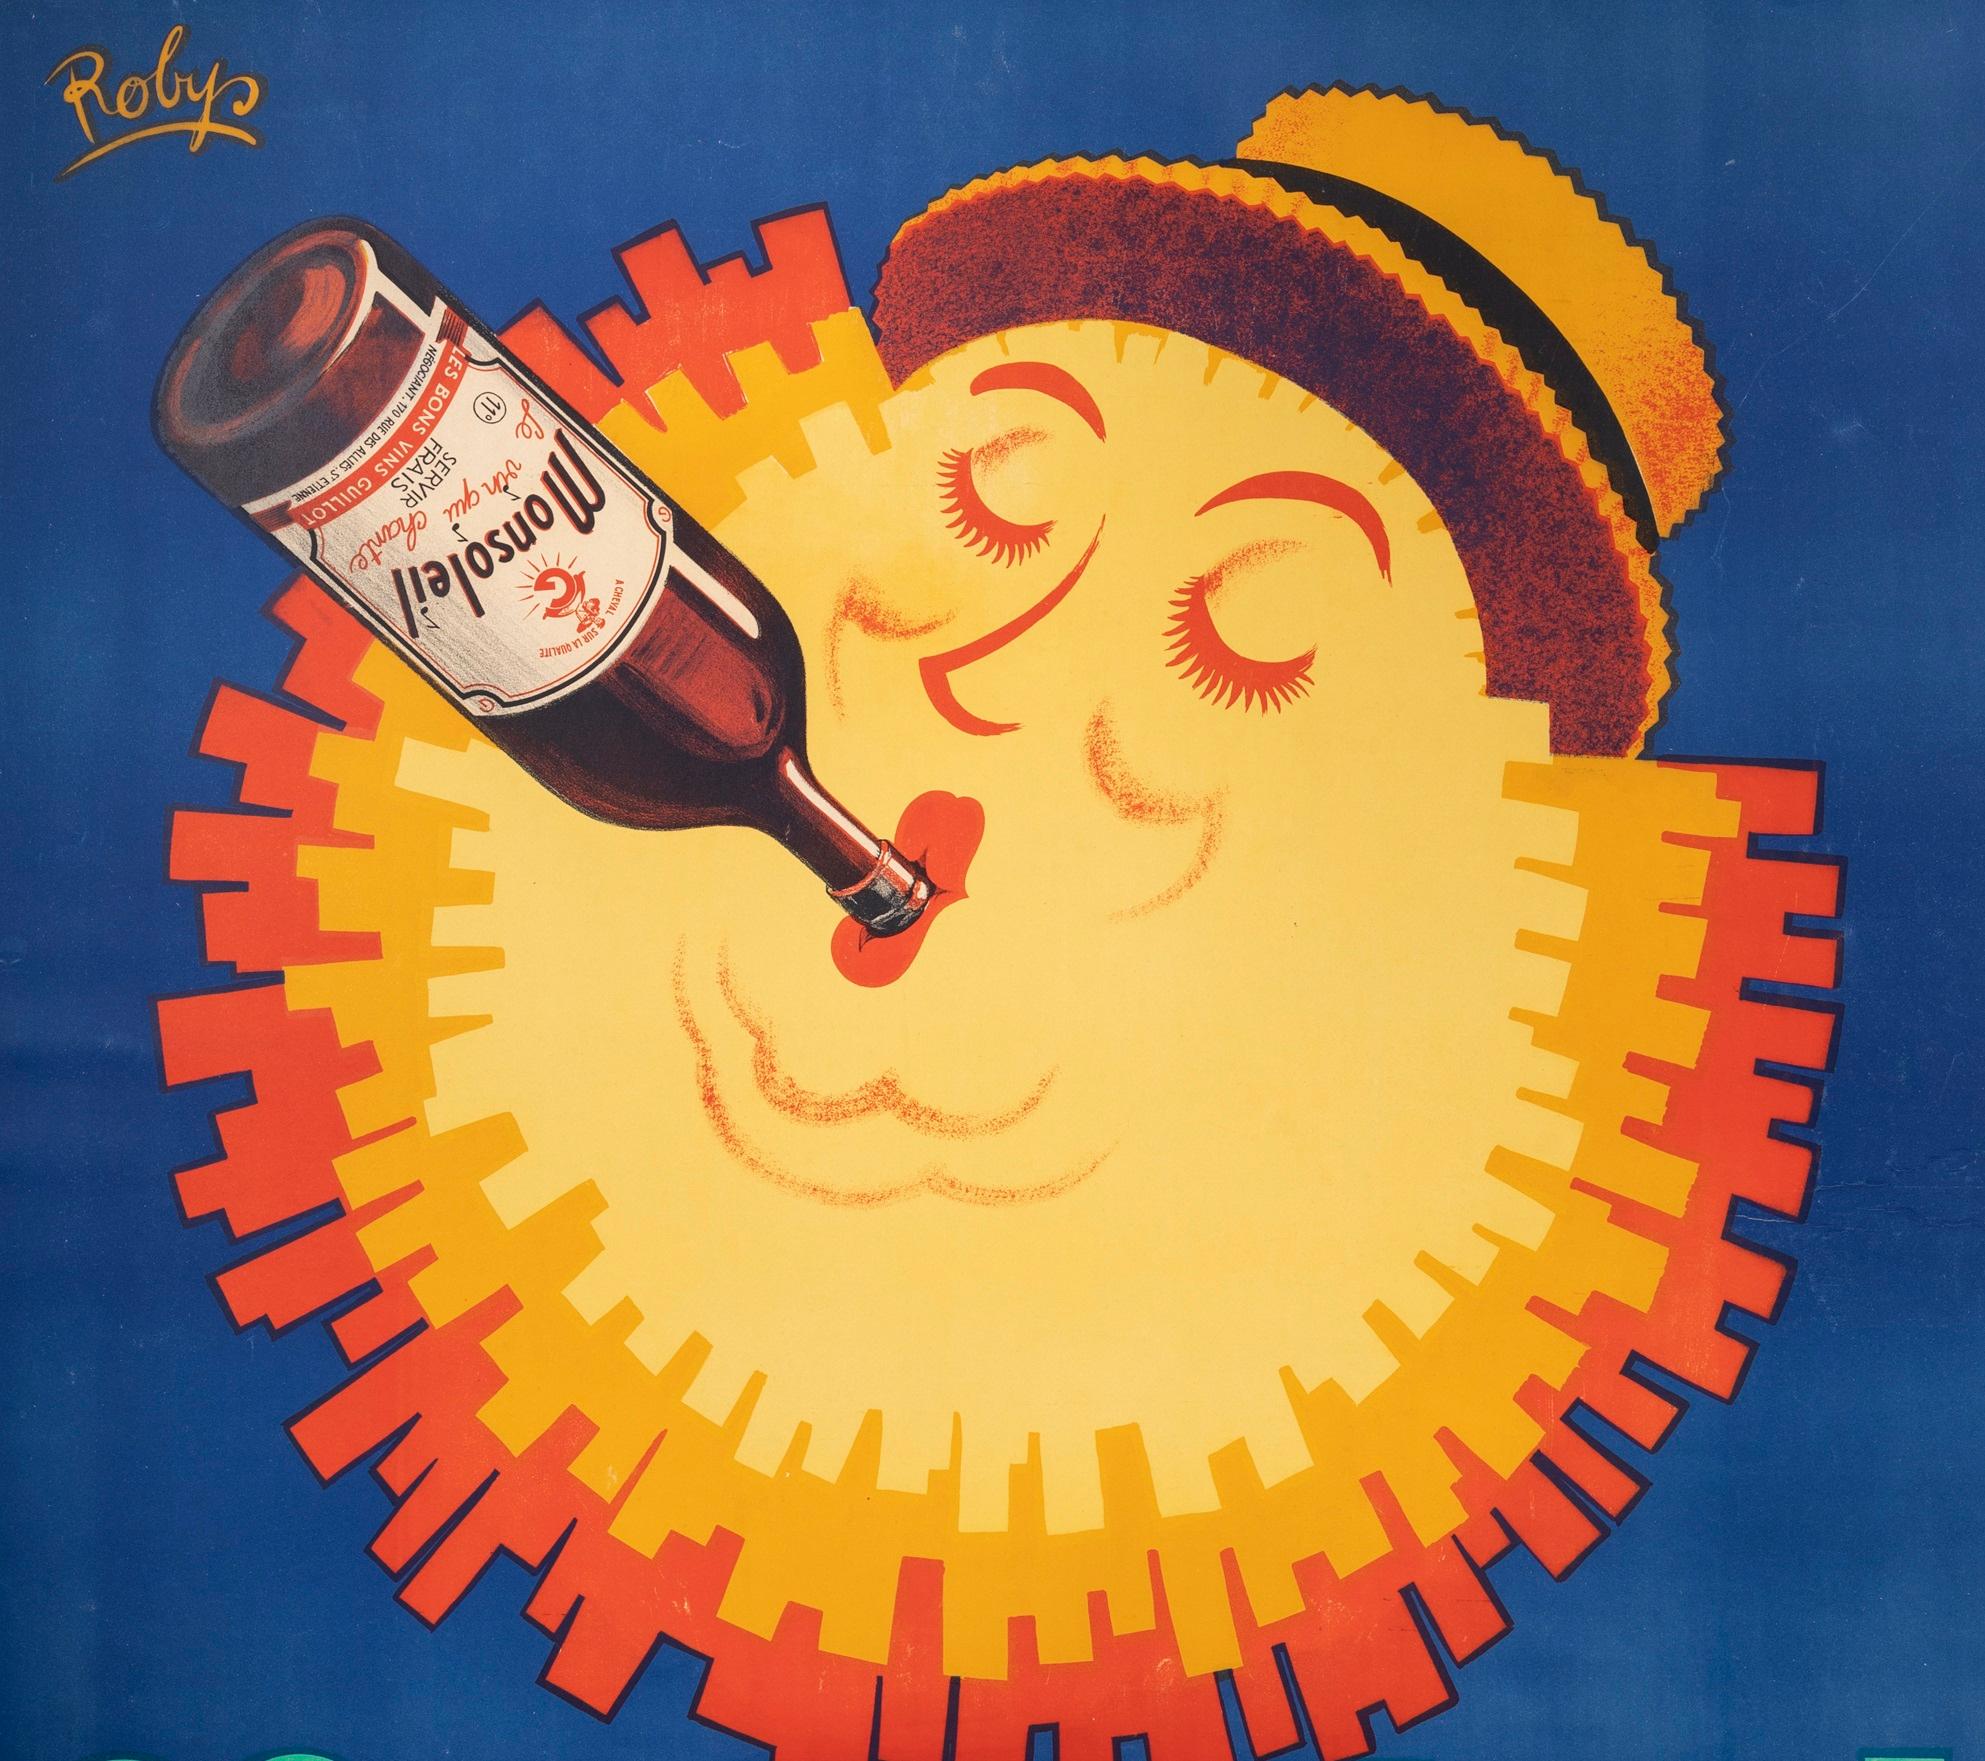 Original Vintage Poster for Monsoleil, Wine poster, created by Robys in 1940.

Artist: Robys (Robert Wolff 1916-1995)

Title: Monsoleil – Les bons vins Guillot

Date: circa 1940

Size (w x h): 47.2 x 63 in / 120 x 160 cm

Printer: Avenir